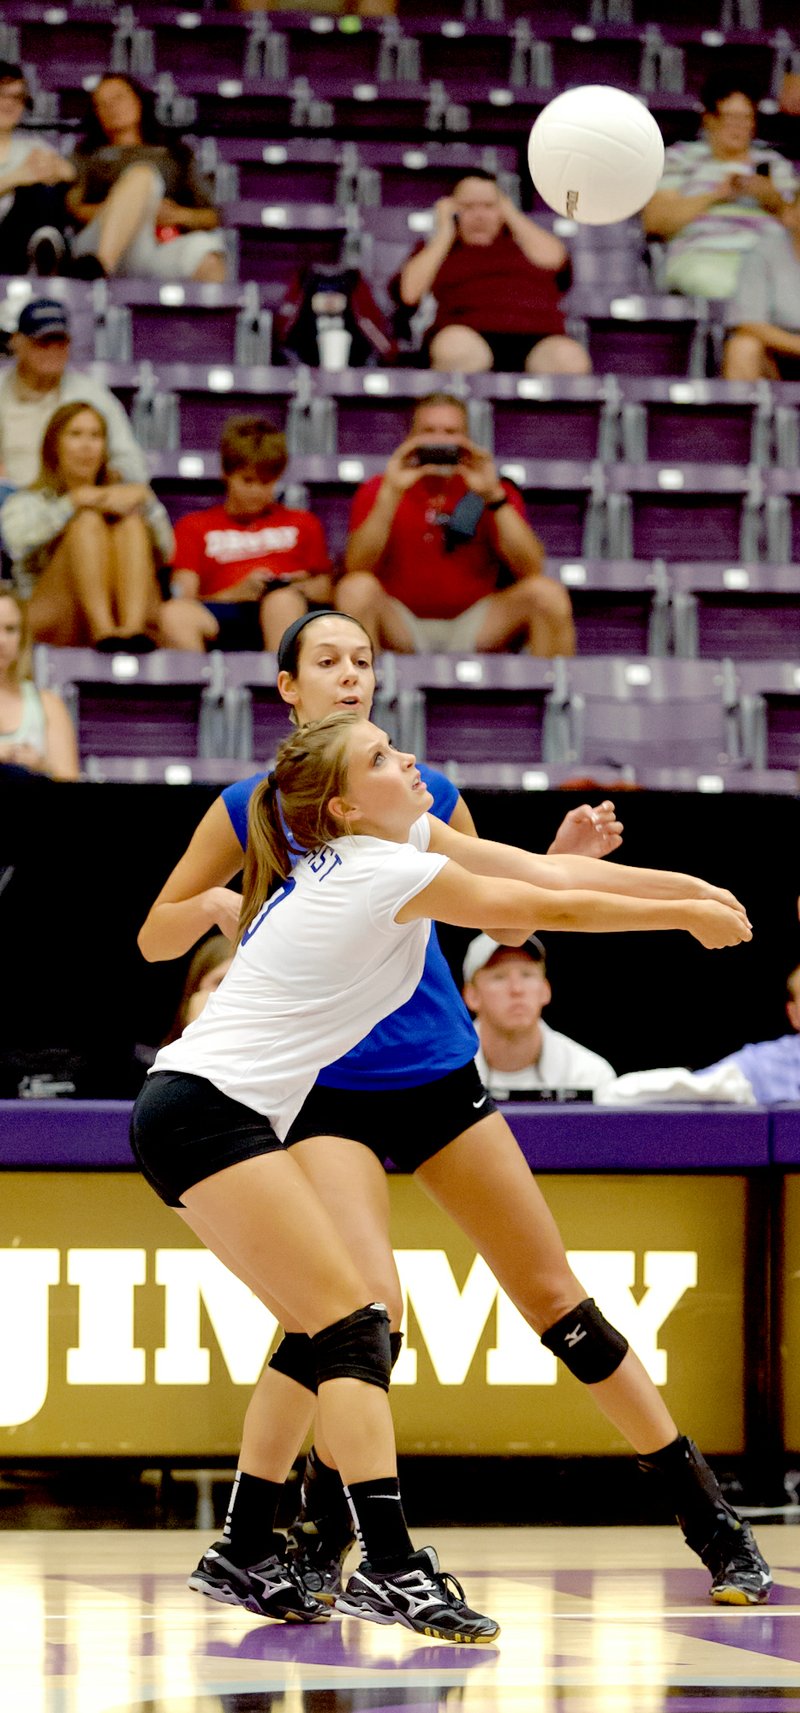 Mike Kemp/Special to Siloam Sunday Former Siloam Springs Lady Panthers standout Taylor Gay returns a ball for the East team while participating in the Arkansas High School Coaches Associaton All-Star Volleyball game on Wednesday at the Farris Center on the campus of the University of Central Arkansas in Conway.